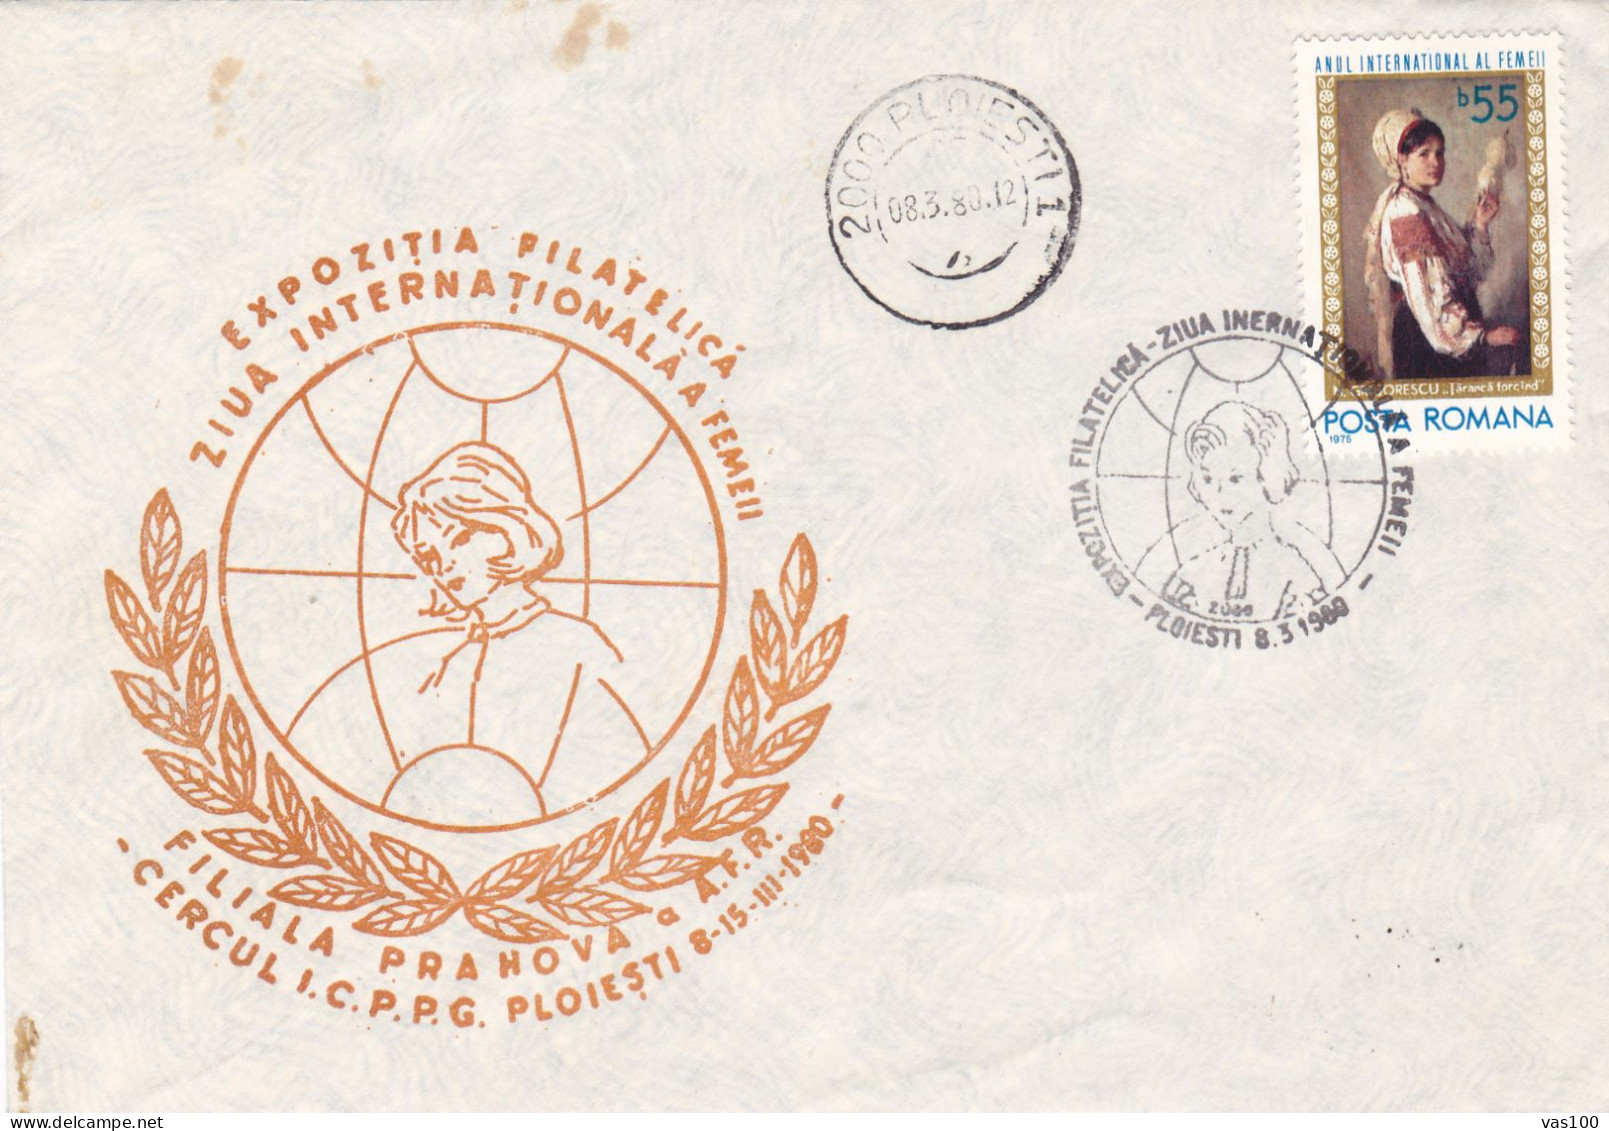 INTERNATIONAL WOMEN'S DAY COVERS   STATIONERY 1980  ROMANIA - Covers & Documents